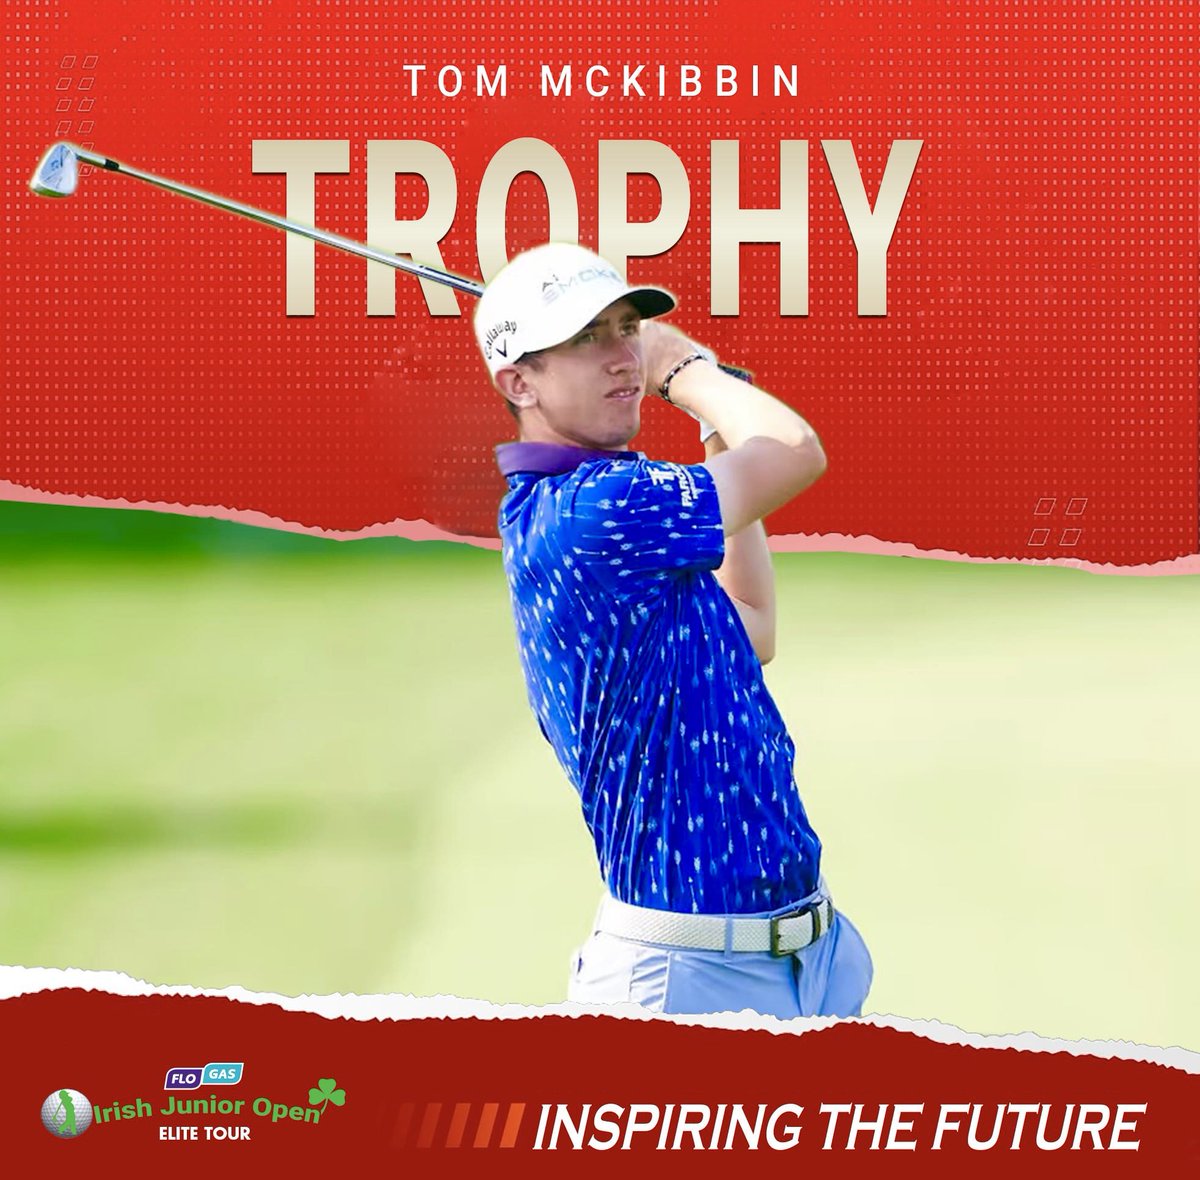 Delighted to announce the Tom McKibbin Trophy which will be presented to our 'Flogas Irish Junior Open Elite Tour' Champion 🏆 From our Junior Champion to a DP World Tour Champion its an honour to have Tom put his name to this trophy which will inspire the future generations ⛳️